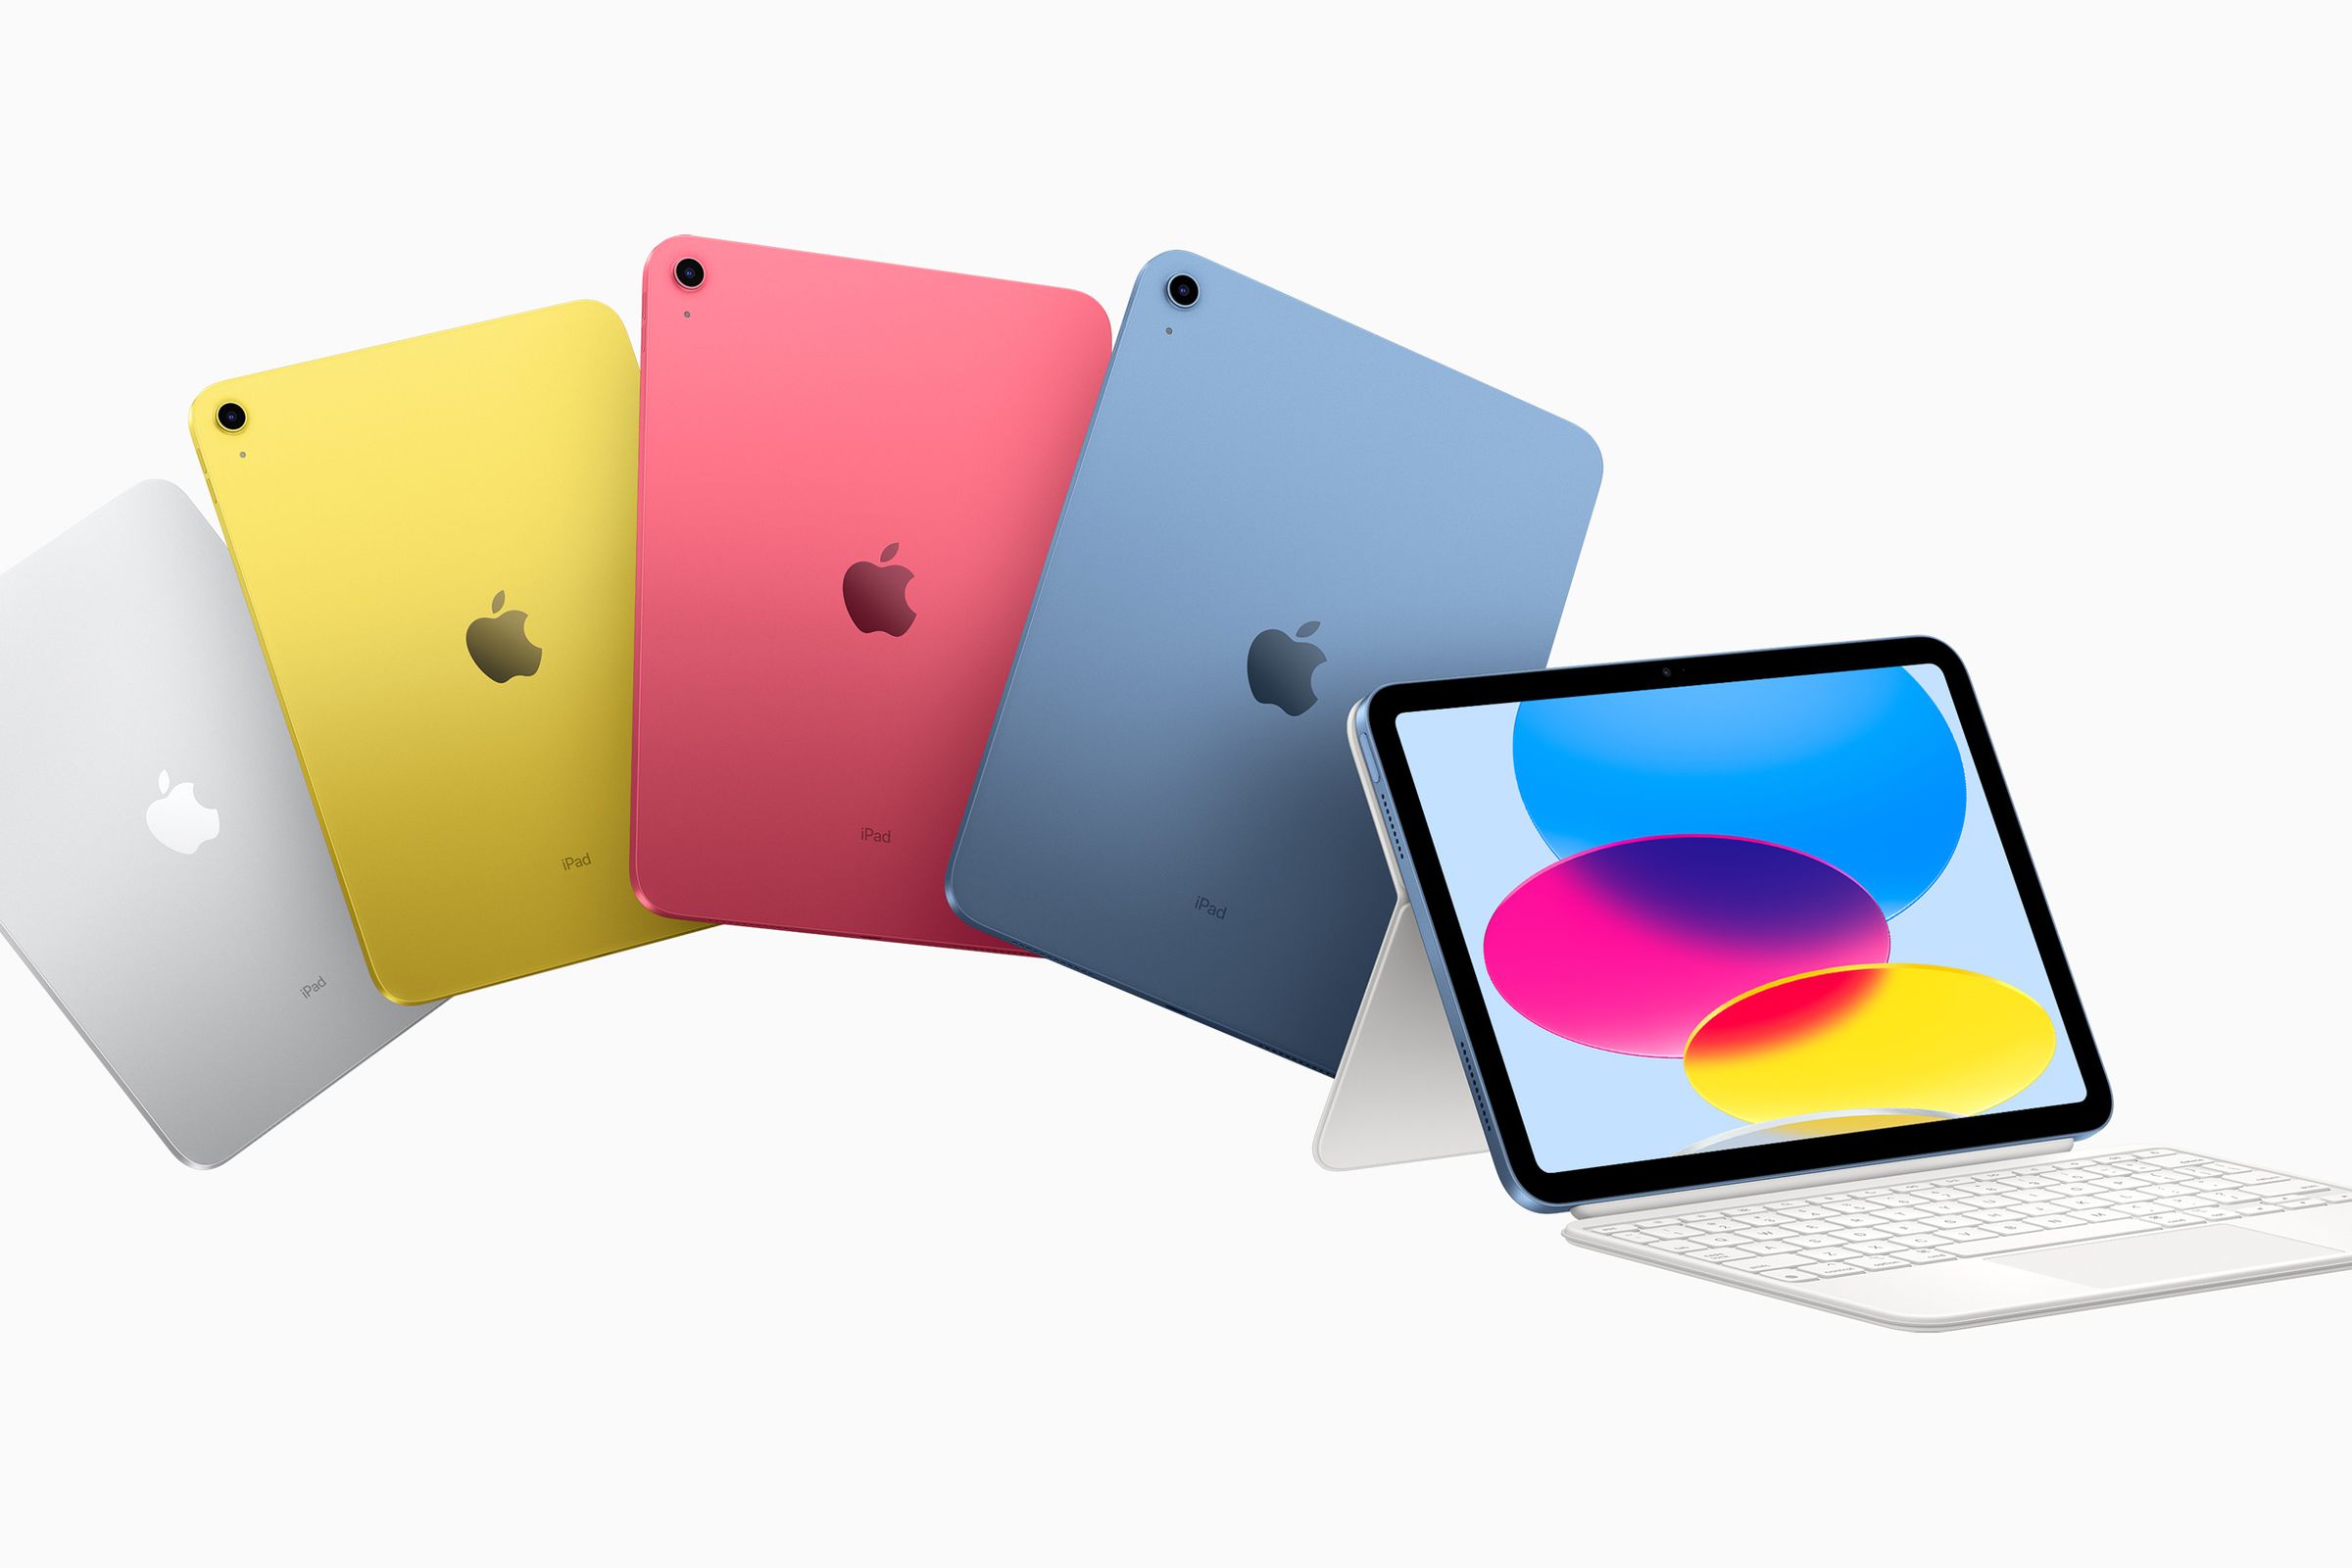 Apple’s new iPad comes in four new colors